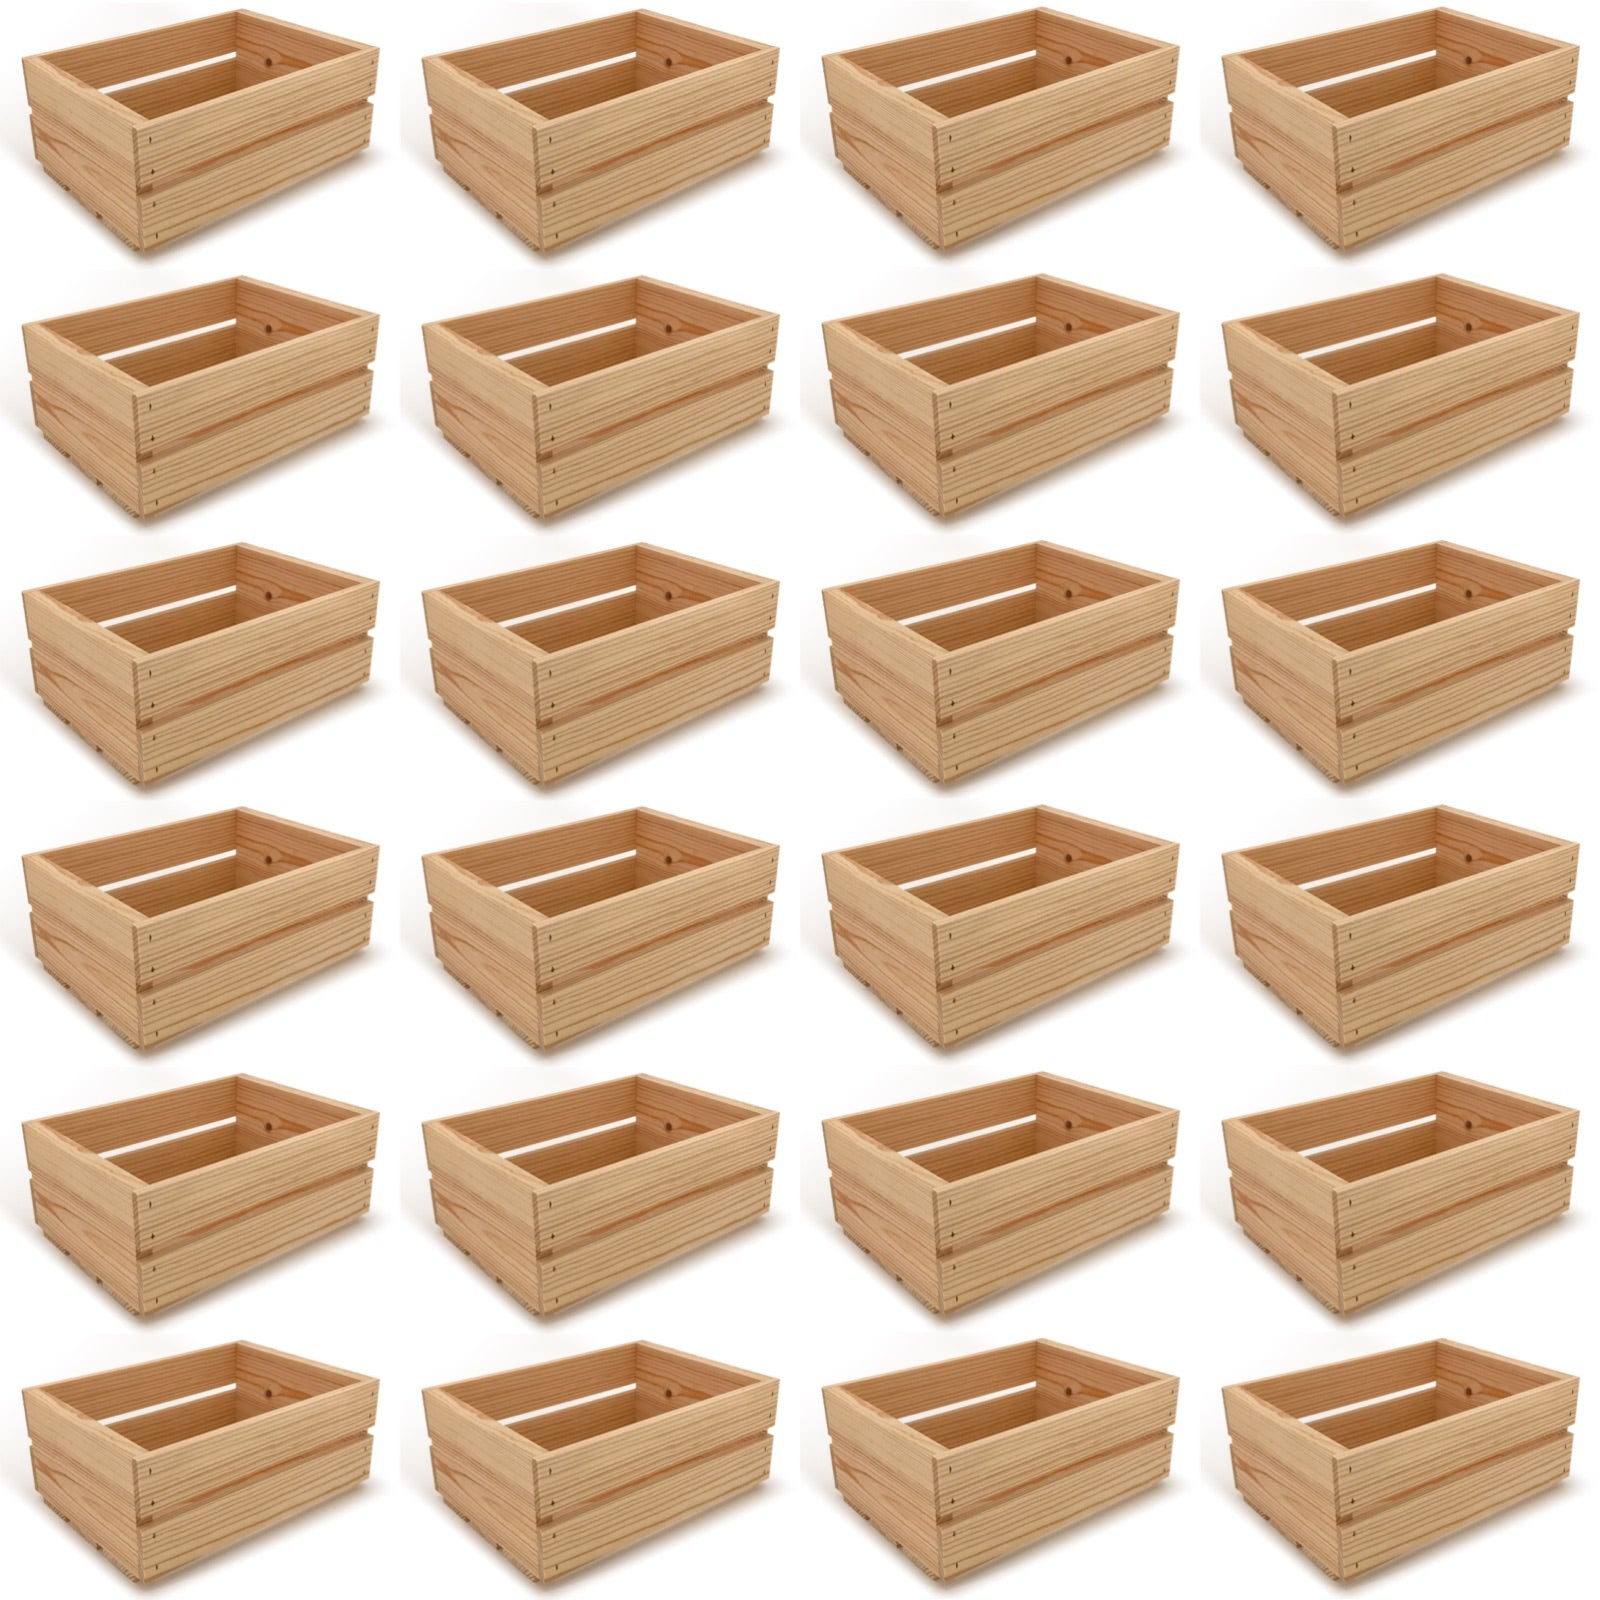 24 Small wooden crates 12x9x5.25